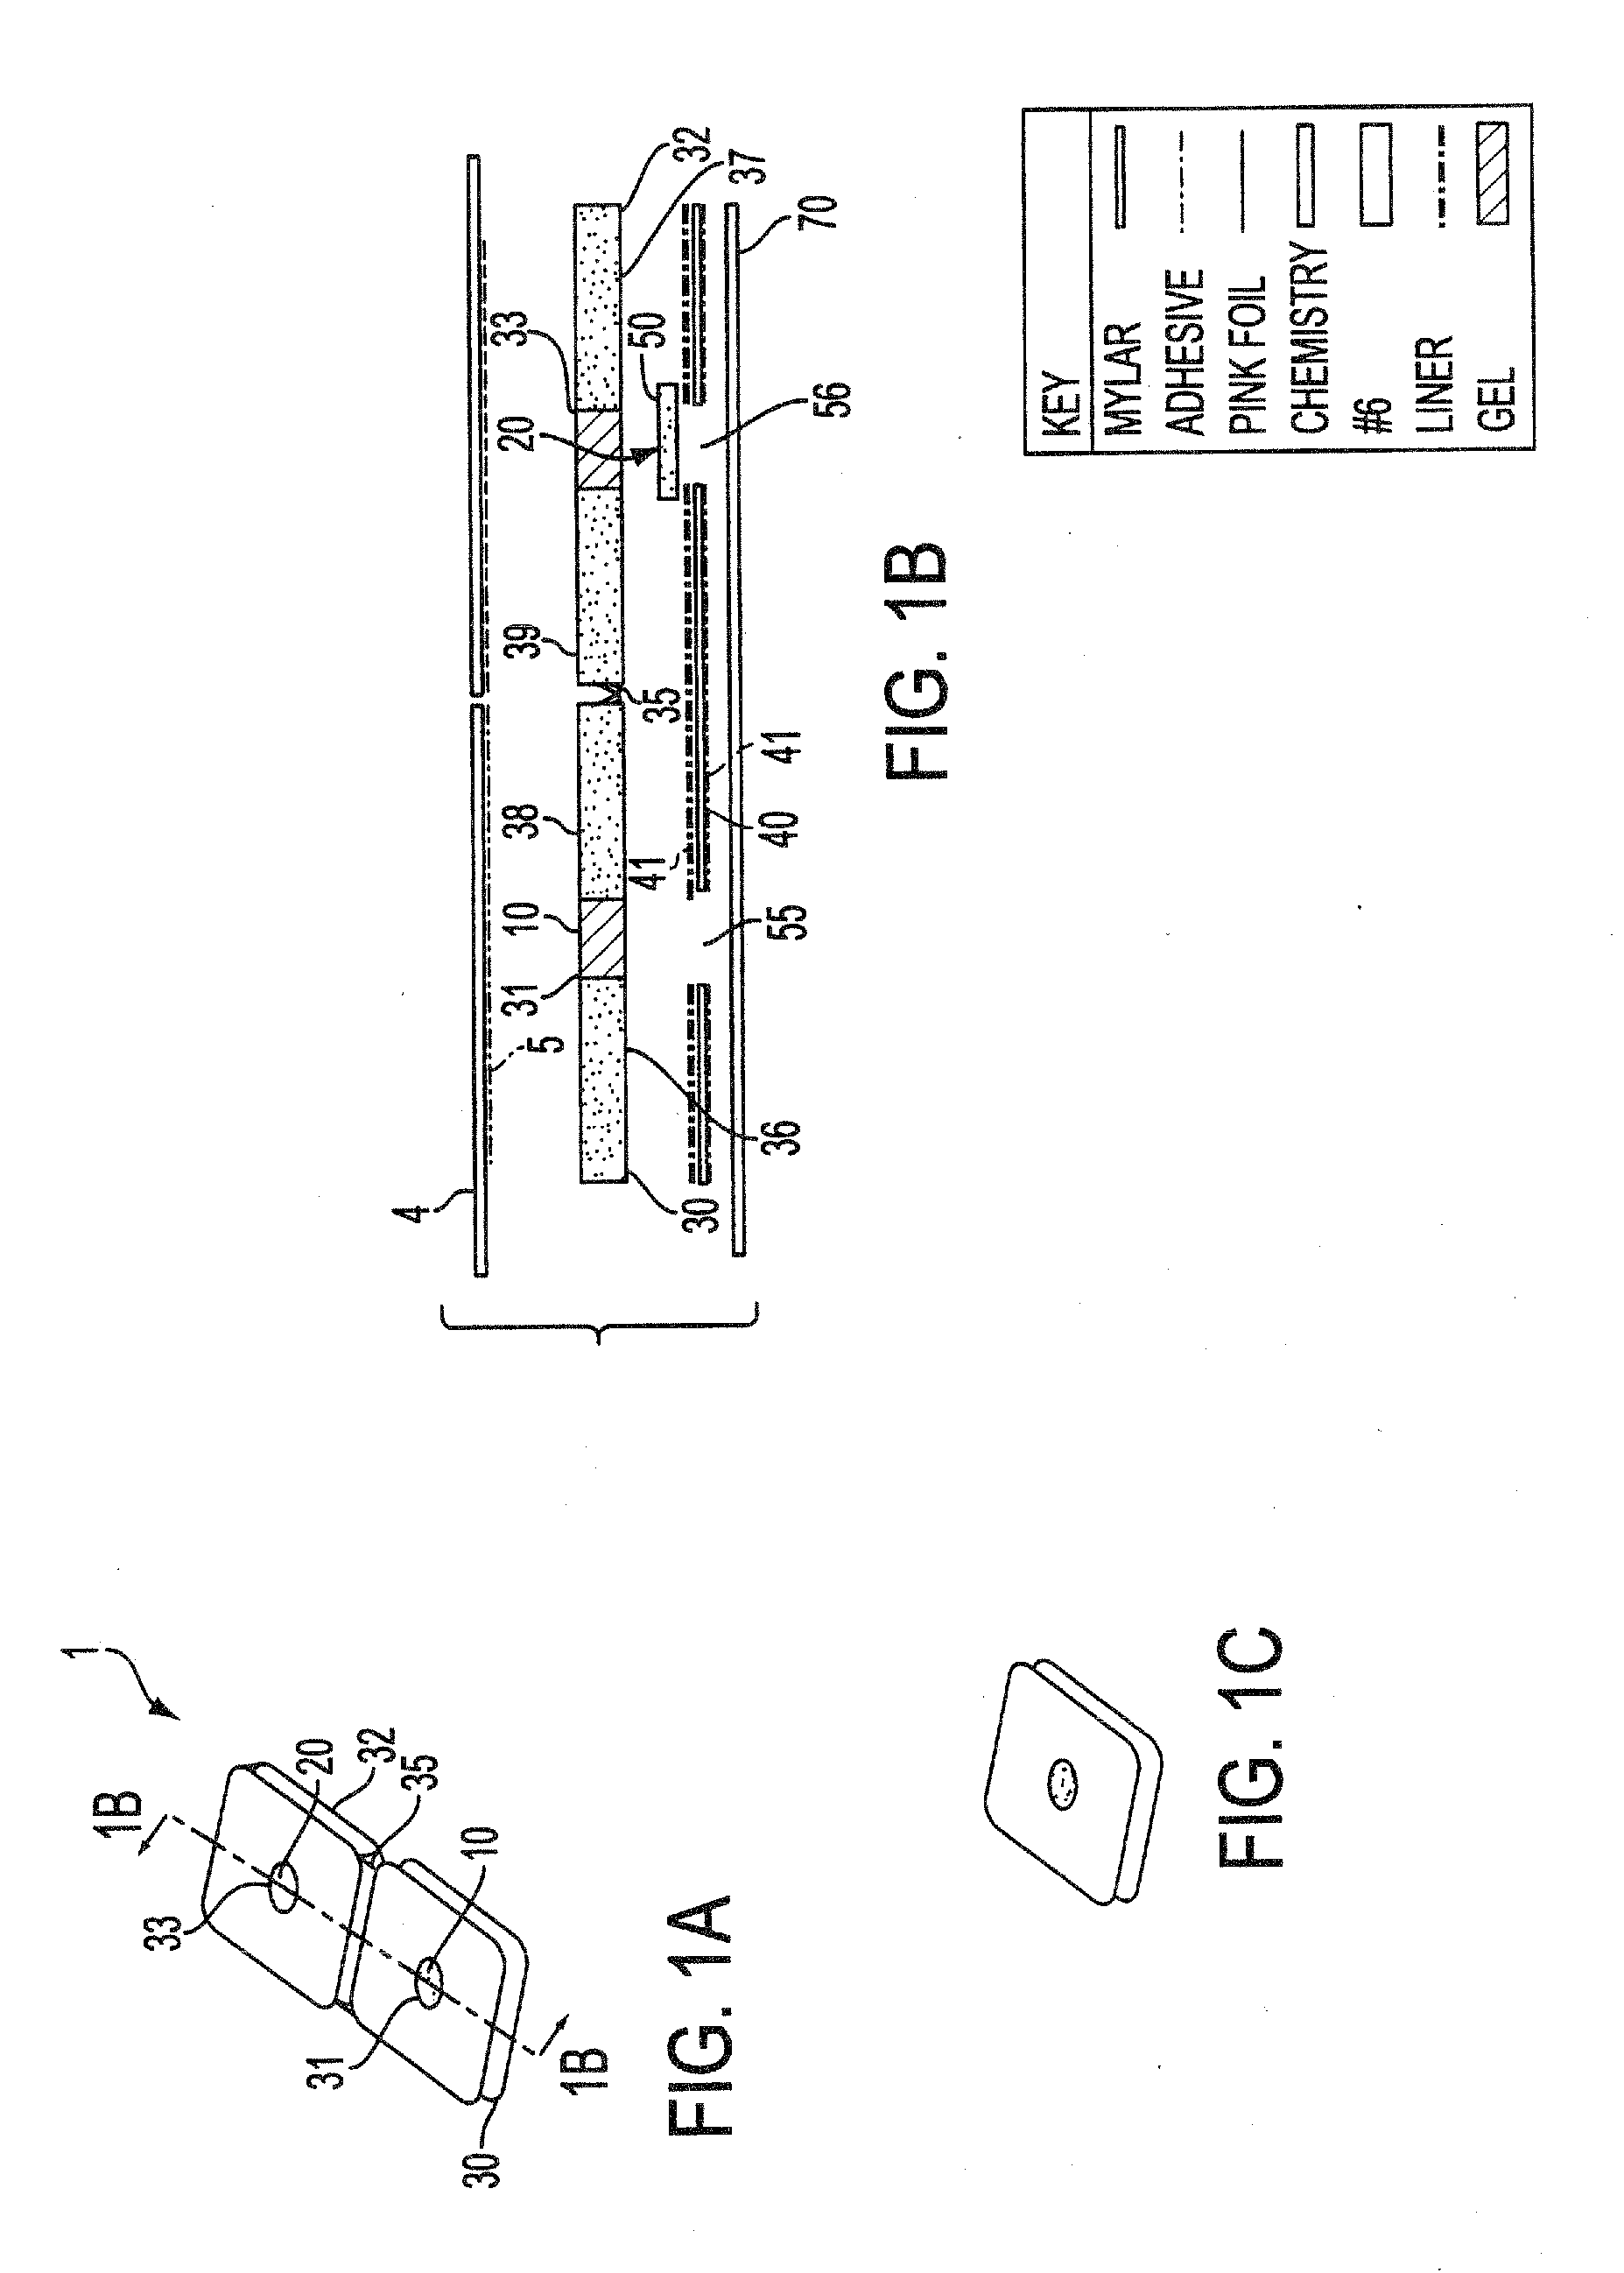 Noninvasive Transdermal Systems for Detecting an Analyte in a Biological Fluid and Methods